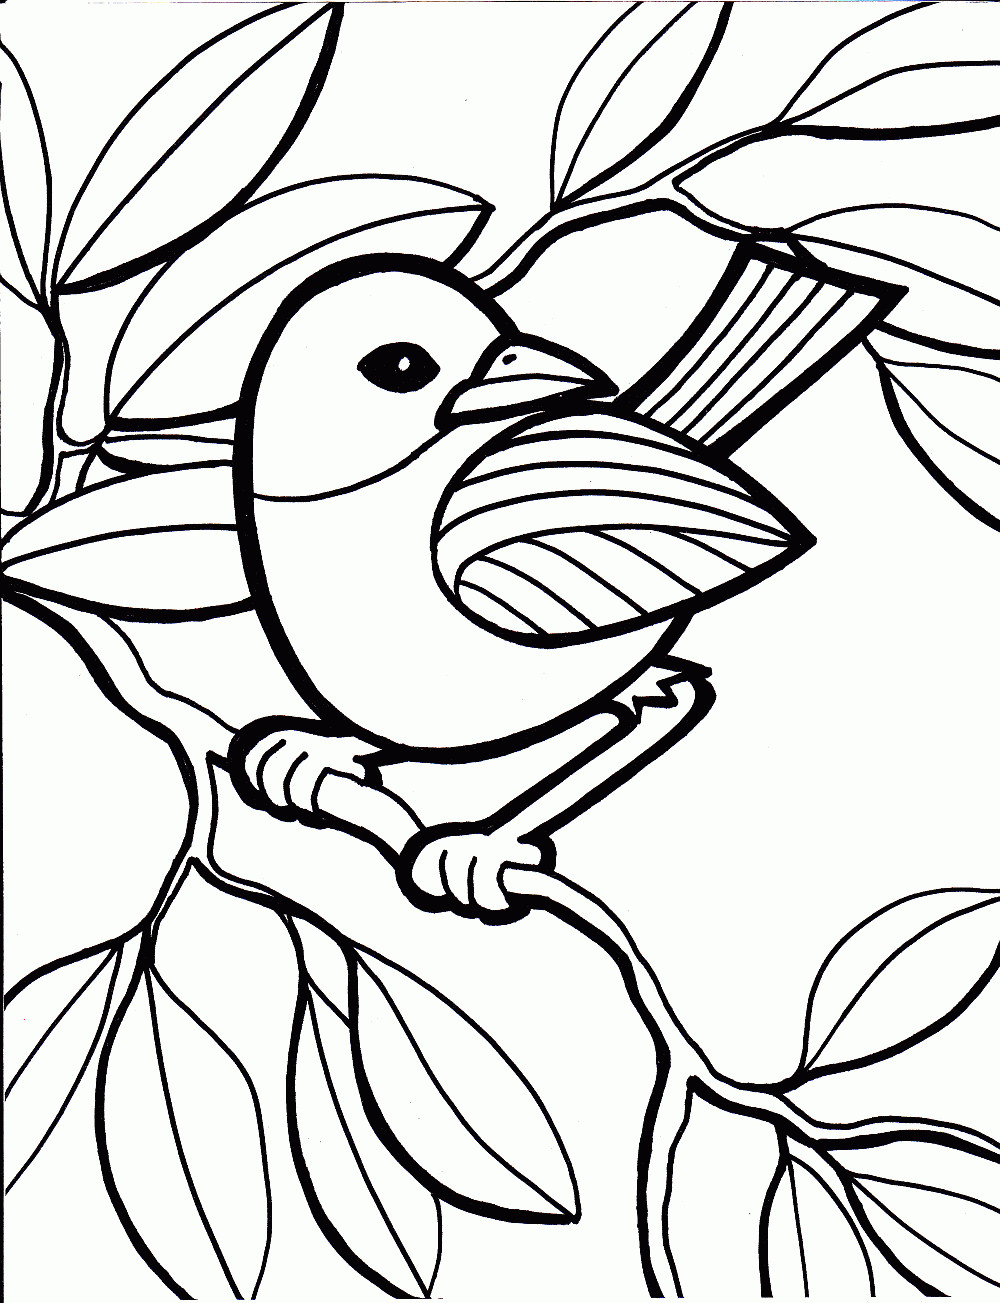 Online Coloring For Kids
 Free Coloring Pages For Kids Top Profile